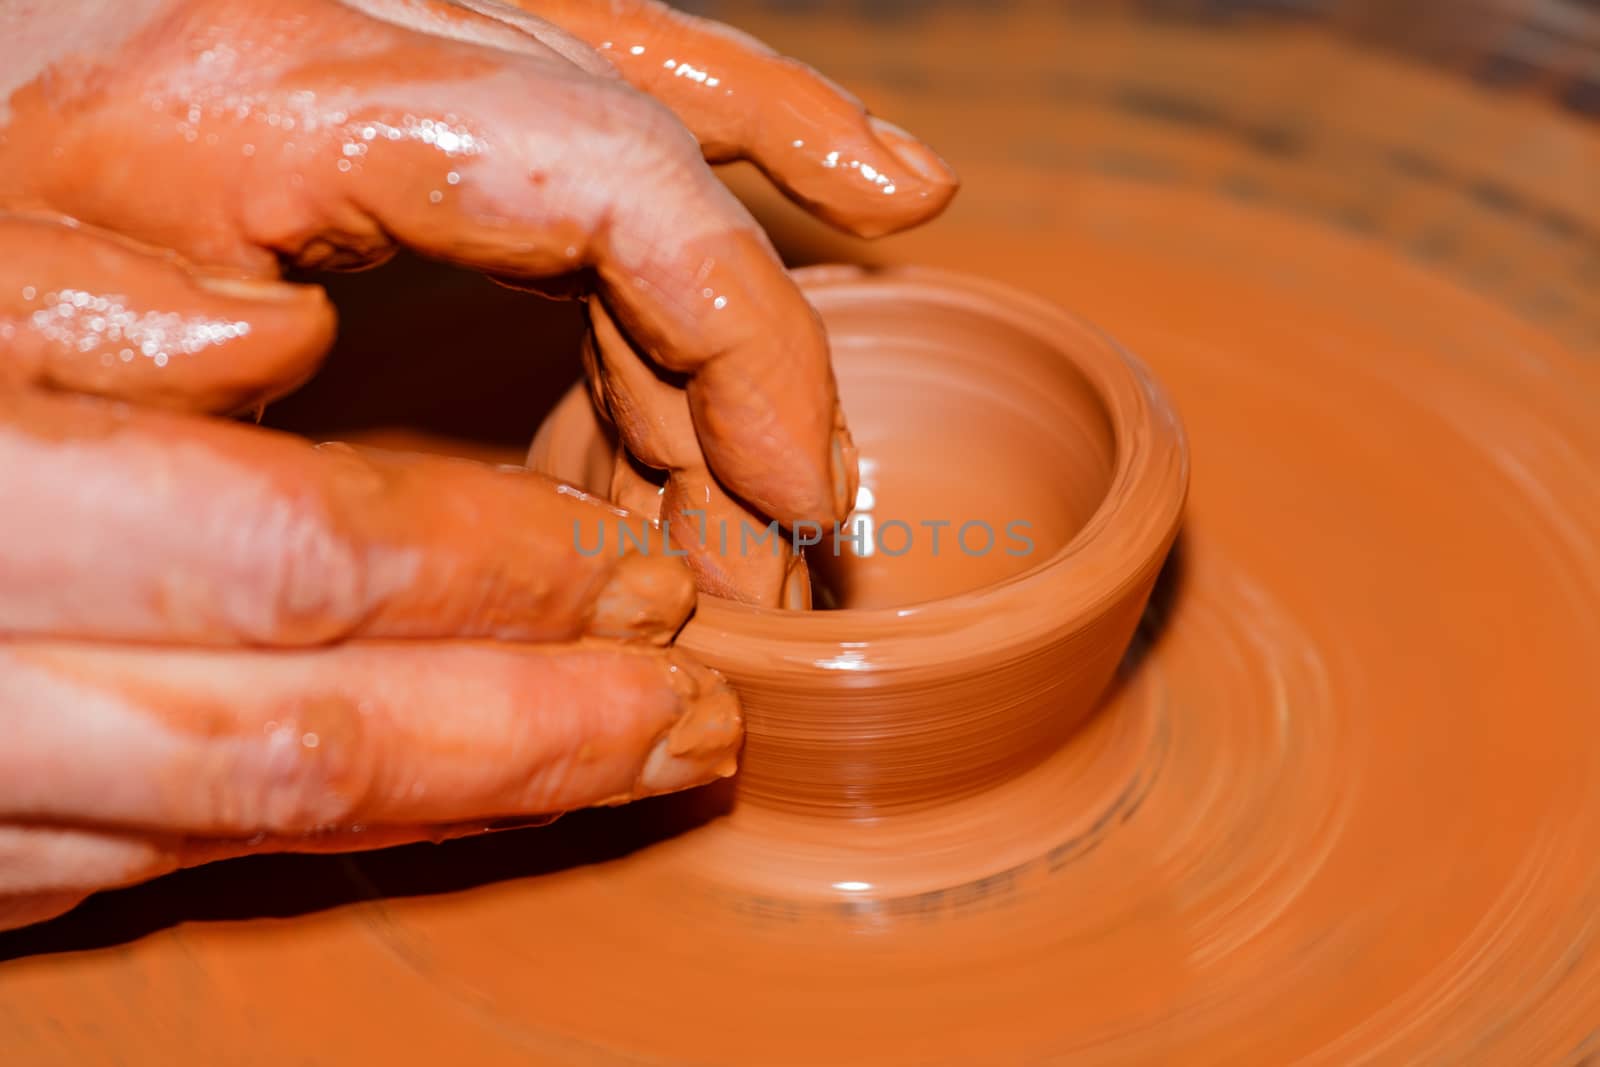 The process of creating pottery by hand